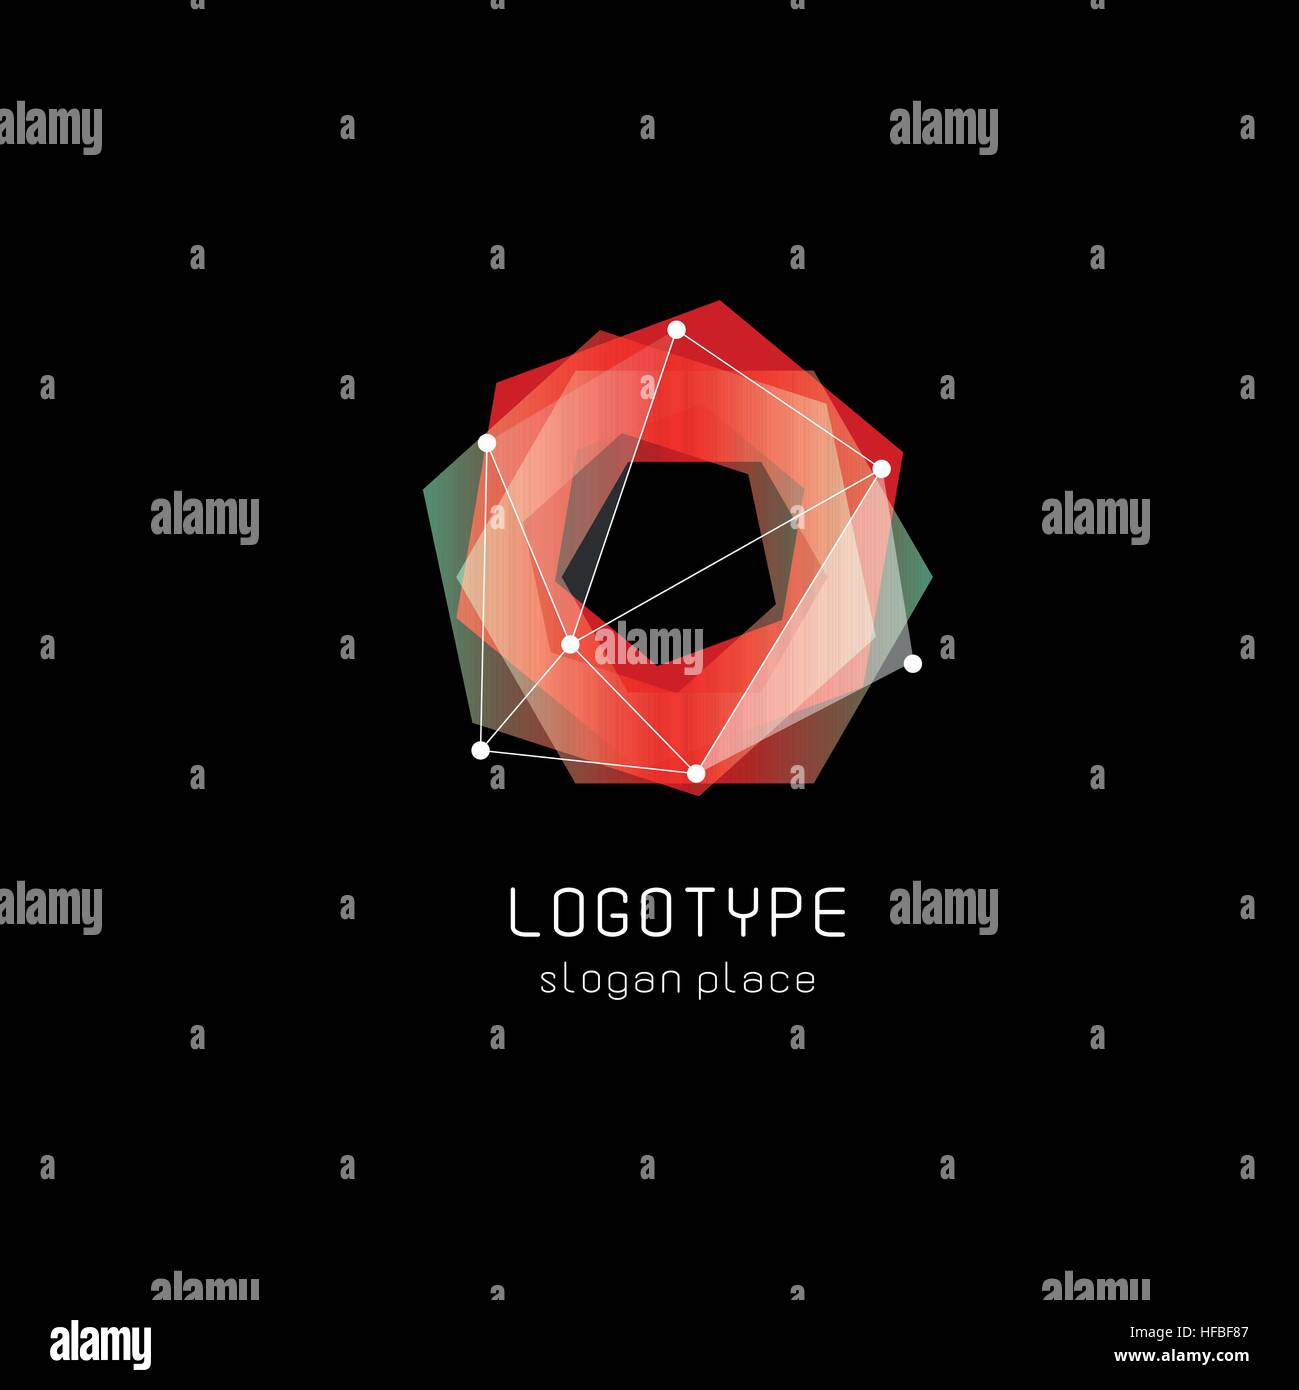 Unusual abstract geometric shapes vector logo. Circular, polygonal colorful logotypes on the black background. Stock Vector